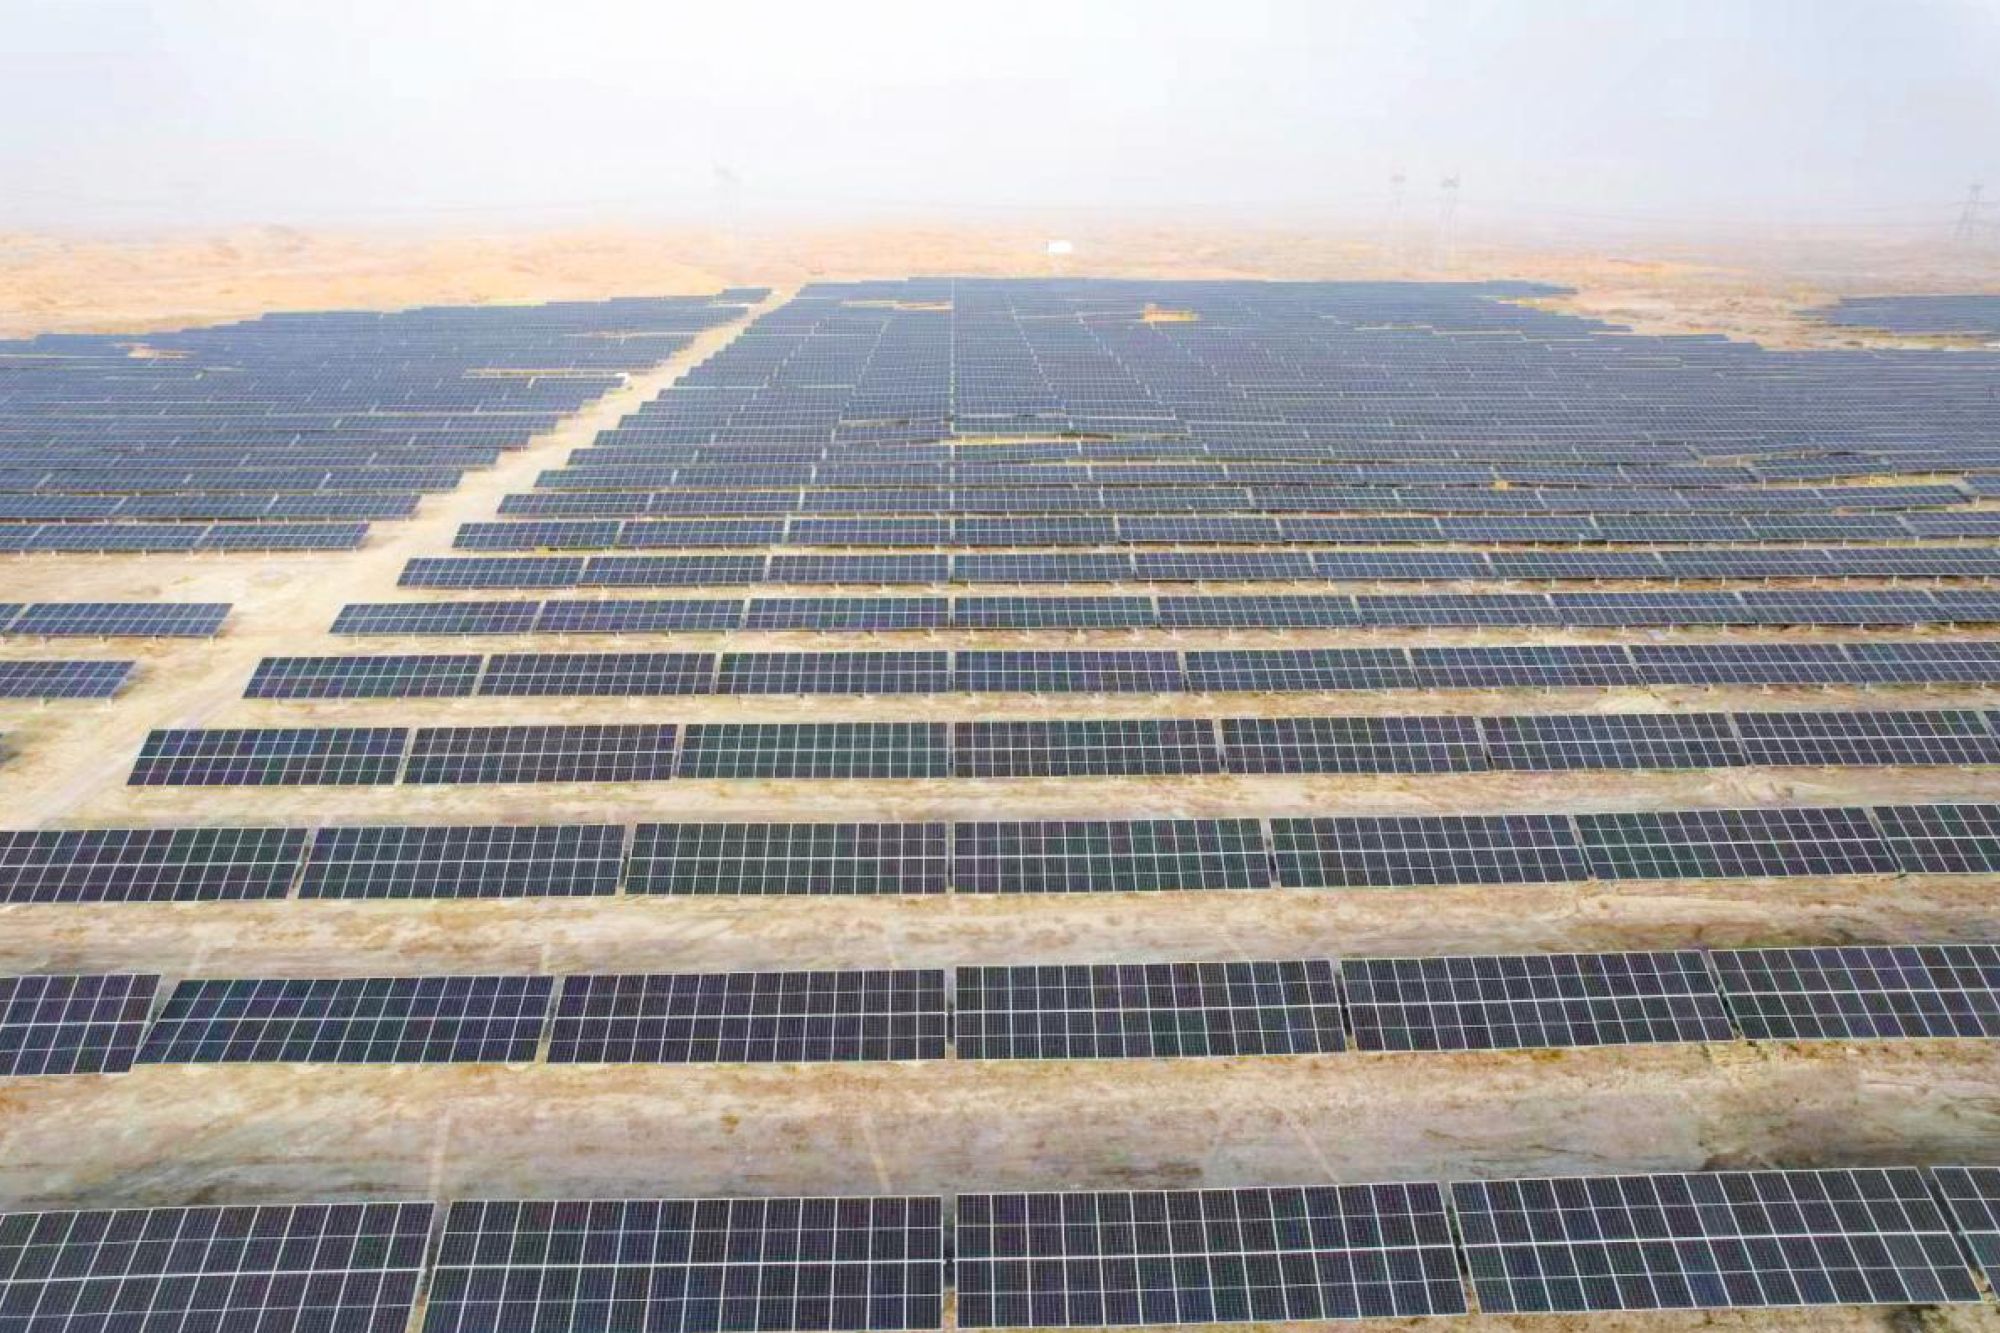 Trina solar completes 30MW project in China’s desert region